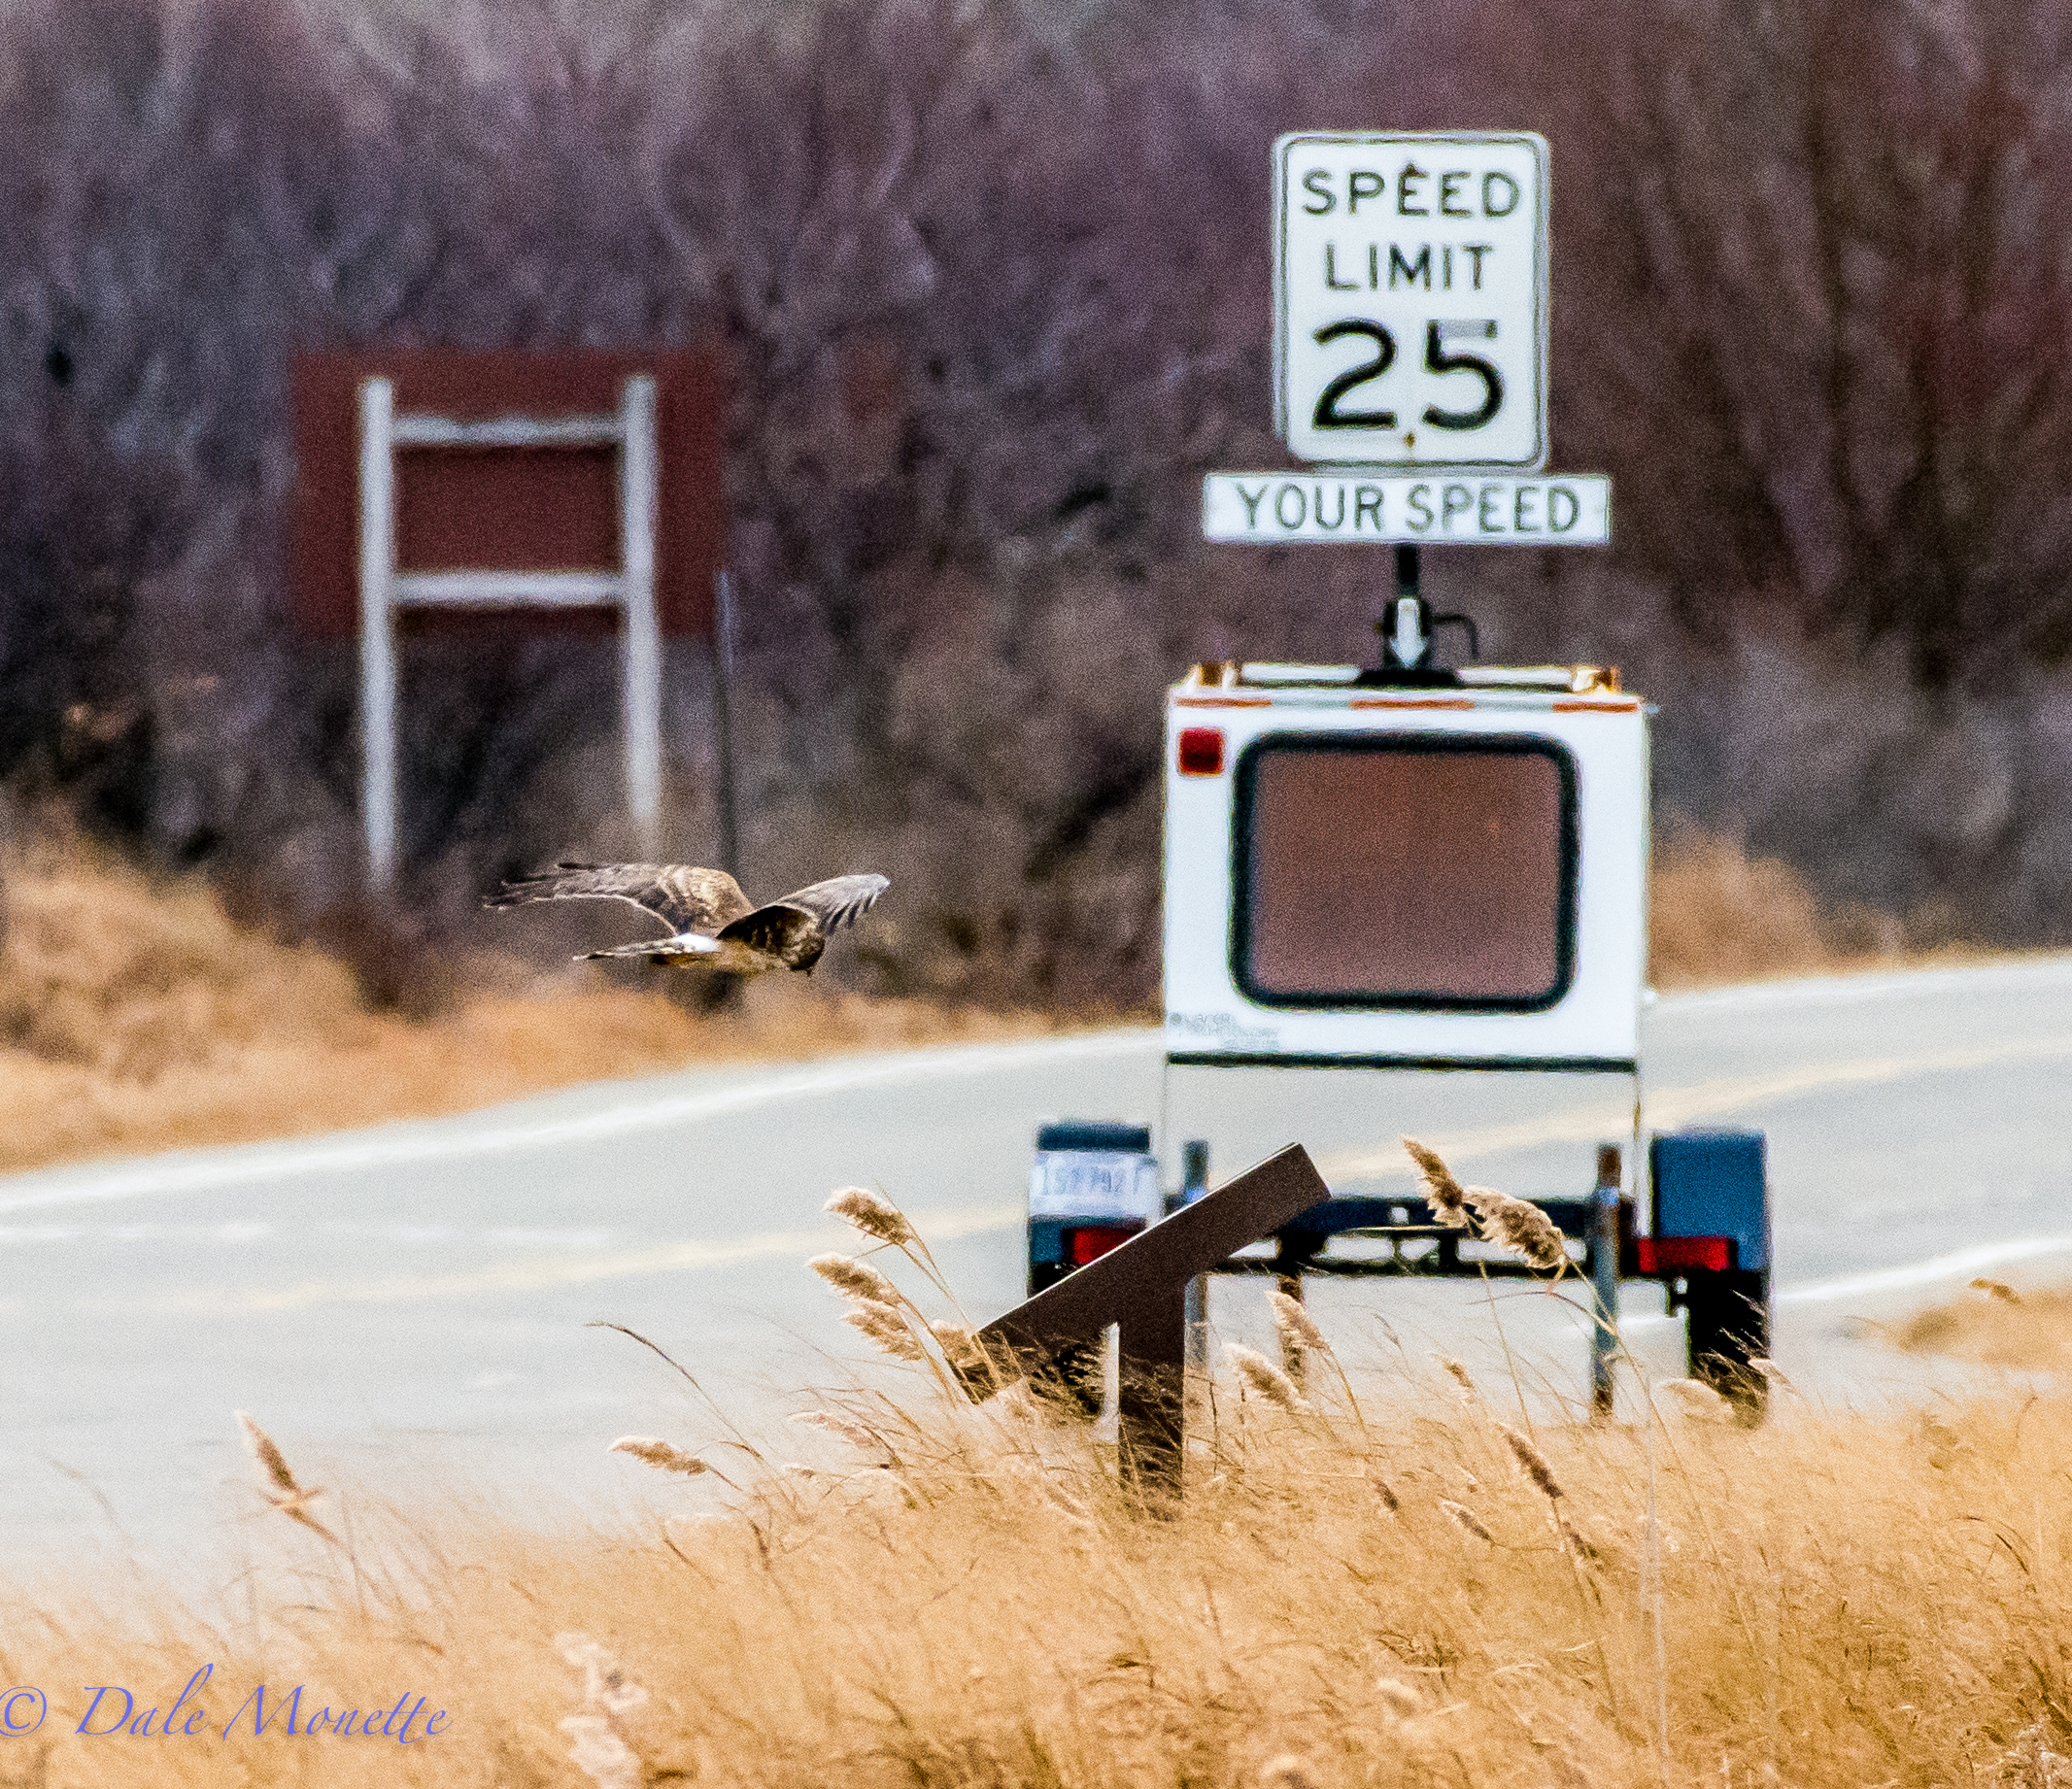   The proof is here in this photo. &nbsp;Harriers do not break the speed limit !! &nbsp;:) &nbsp;Plum Island, 12/21/15  